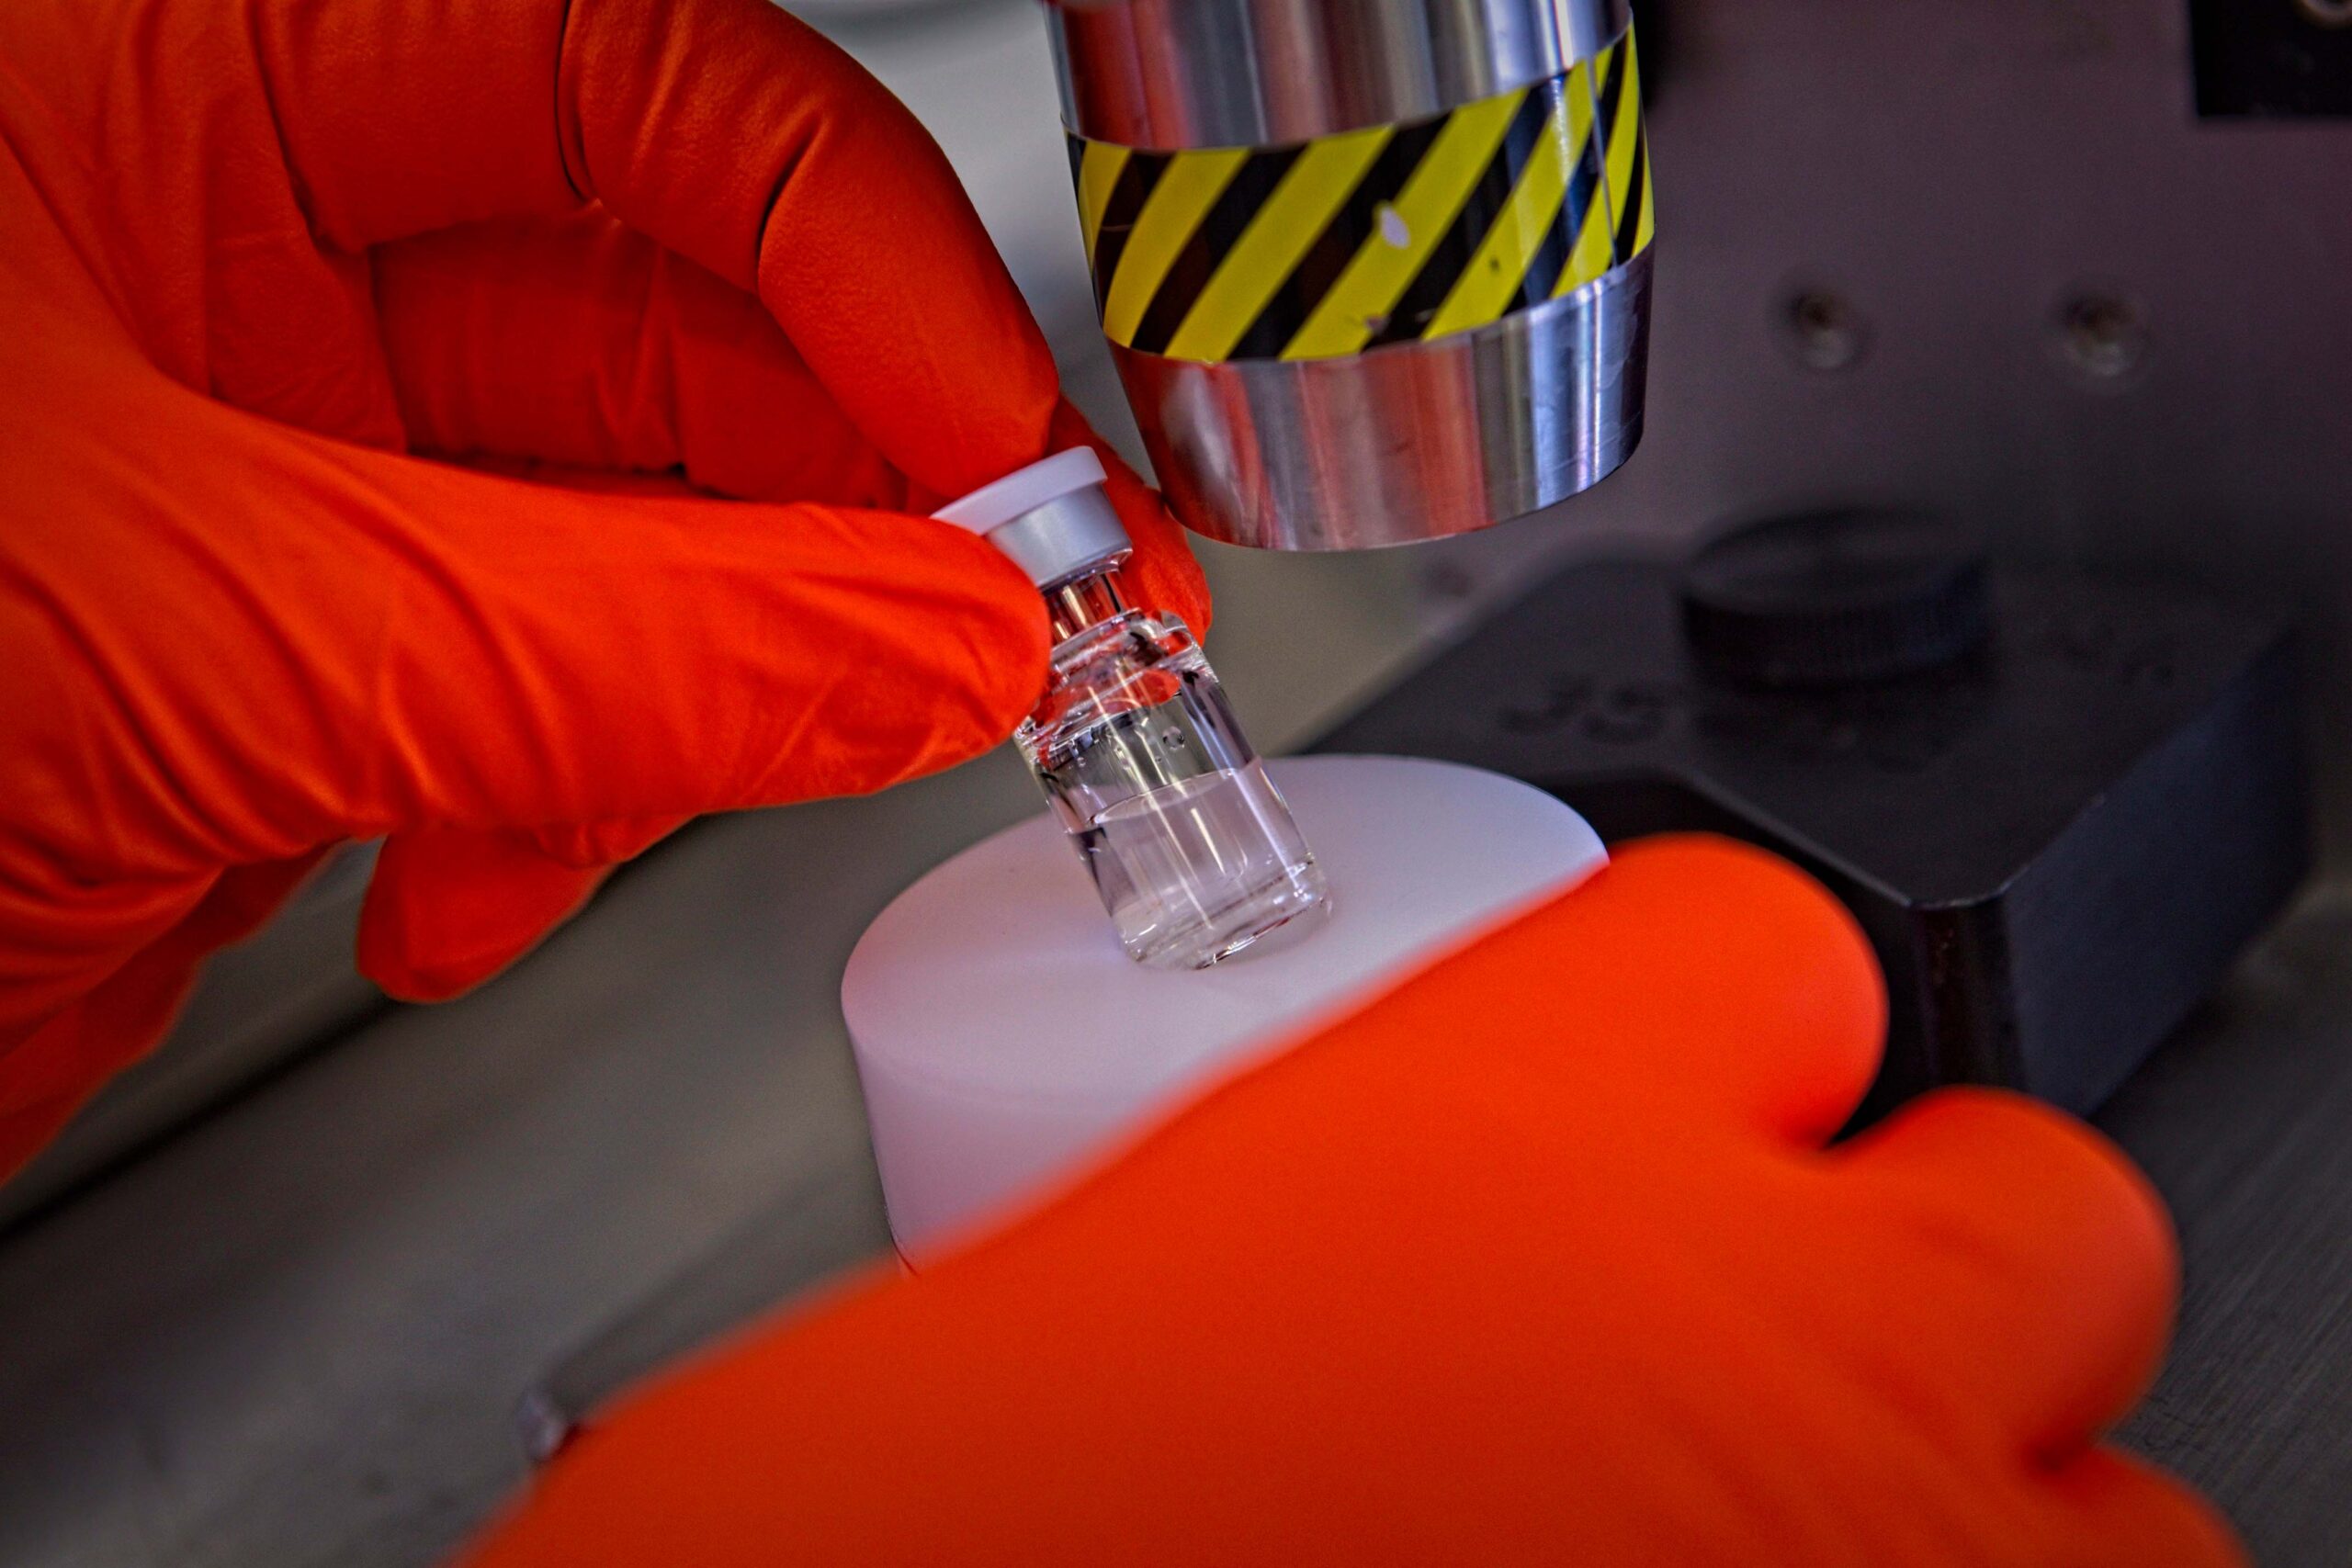 Gloved hands of a biologics CMO scientist removing a vial from the automatic crimper